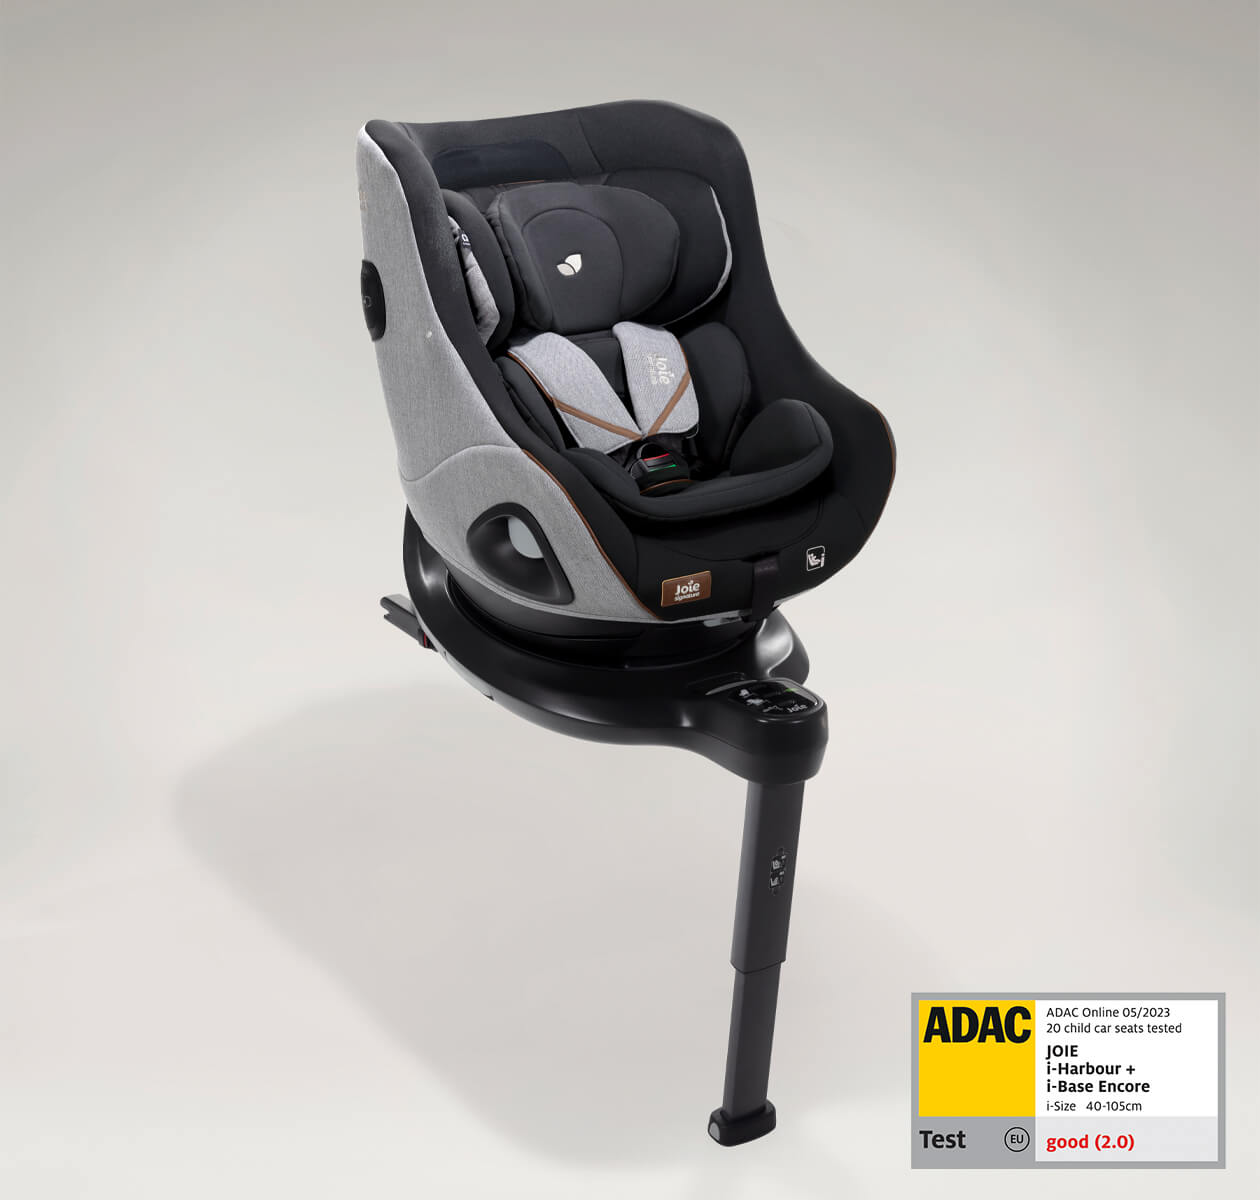 Light gray and black Joie i-Harbour car seat at an angle, with the ADAC test label in the lower right corner.